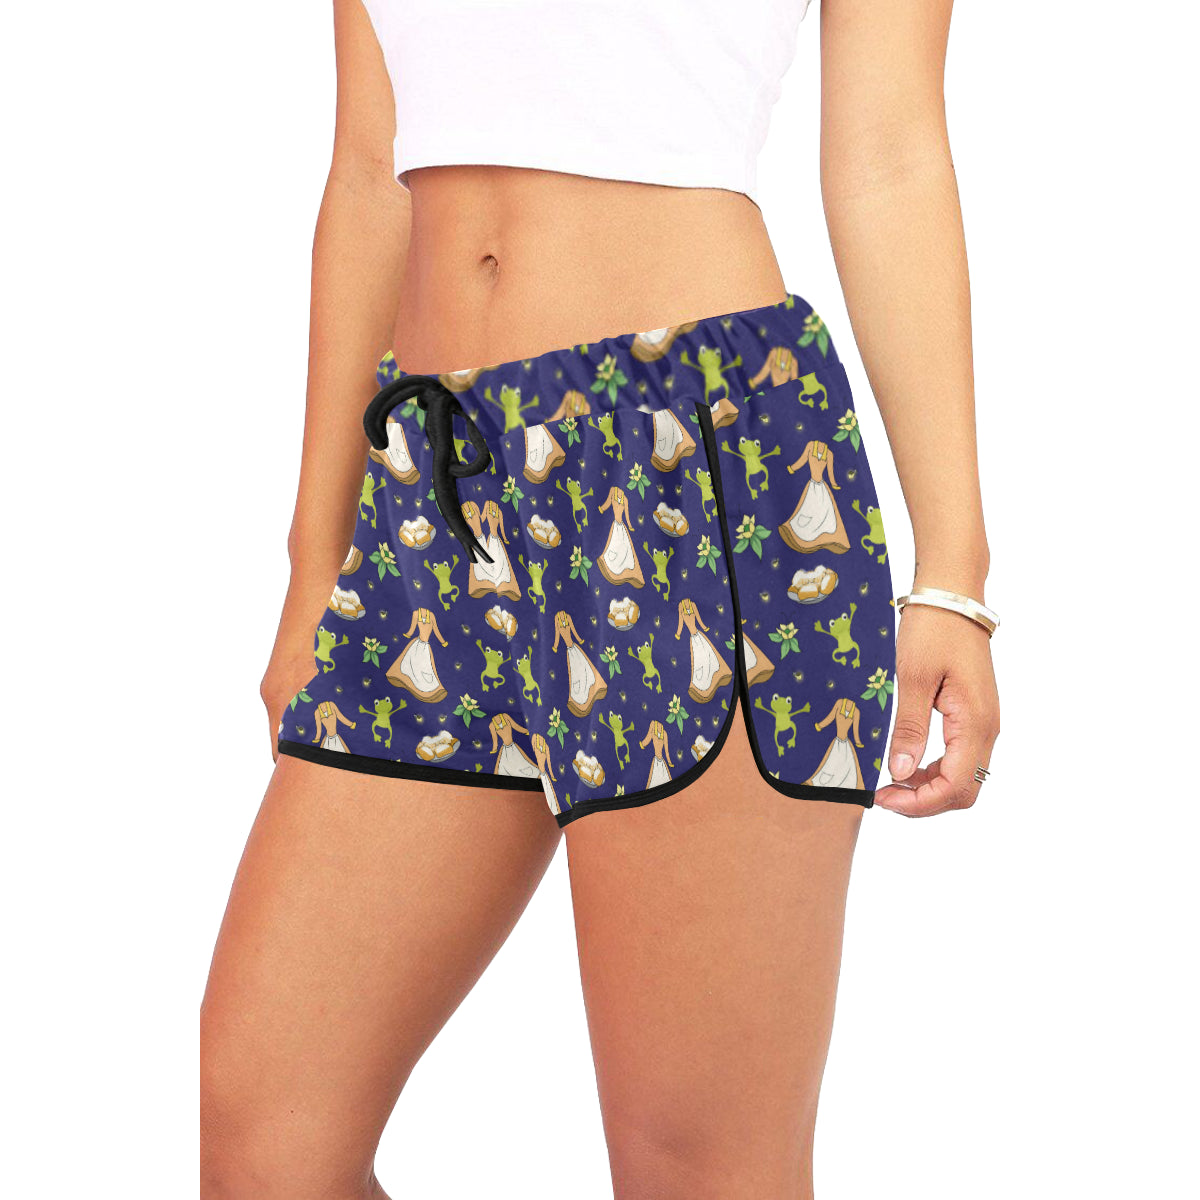 Tiana's Place Women's Relaxed Shorts - Ambrie